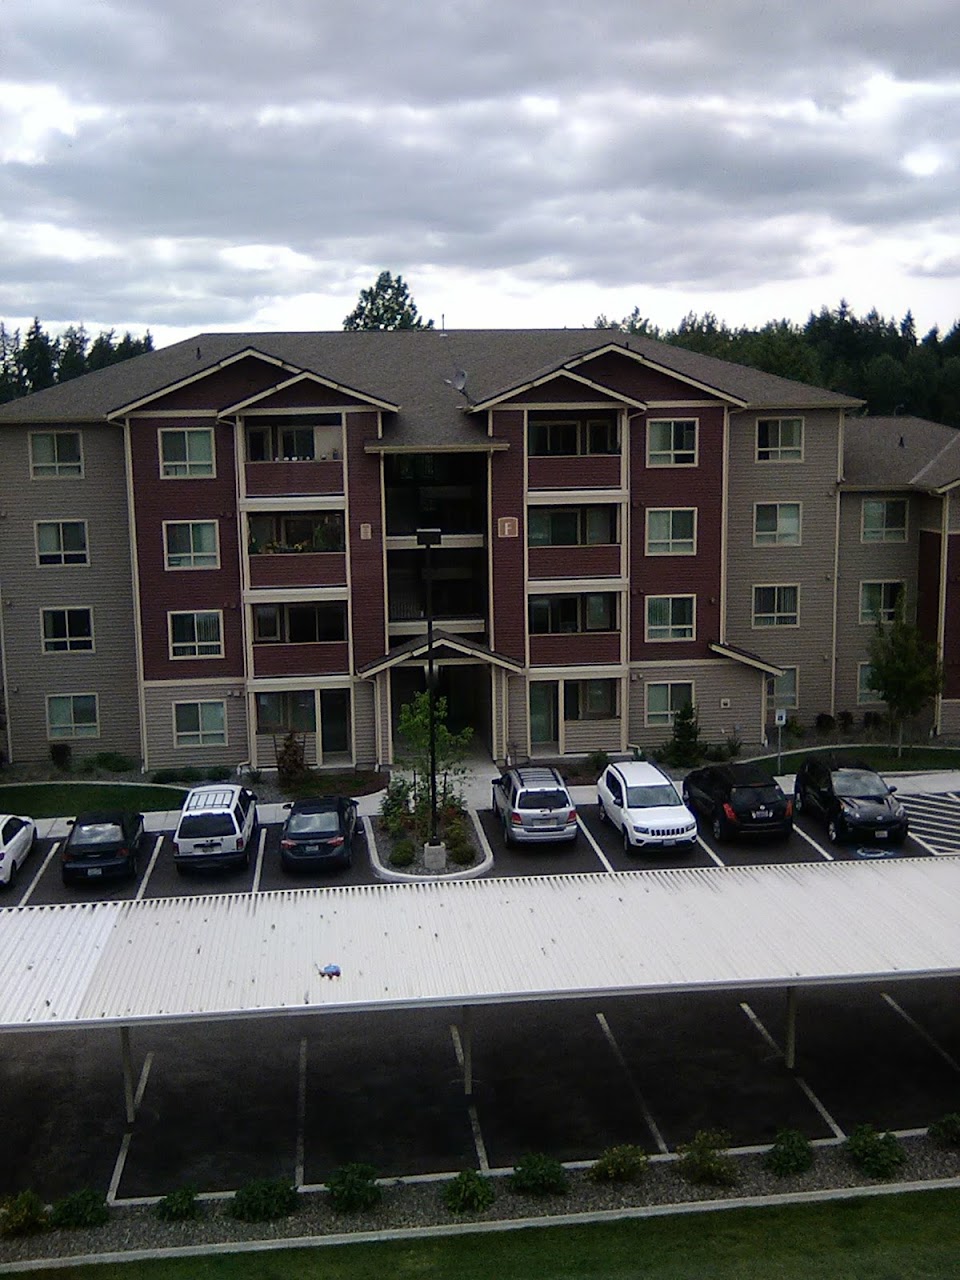 Photo of COPPER VALLEY APARTMENTS. Affordable housing located at 12111 104TH AVE. E. PUYALLUP, WA 98374